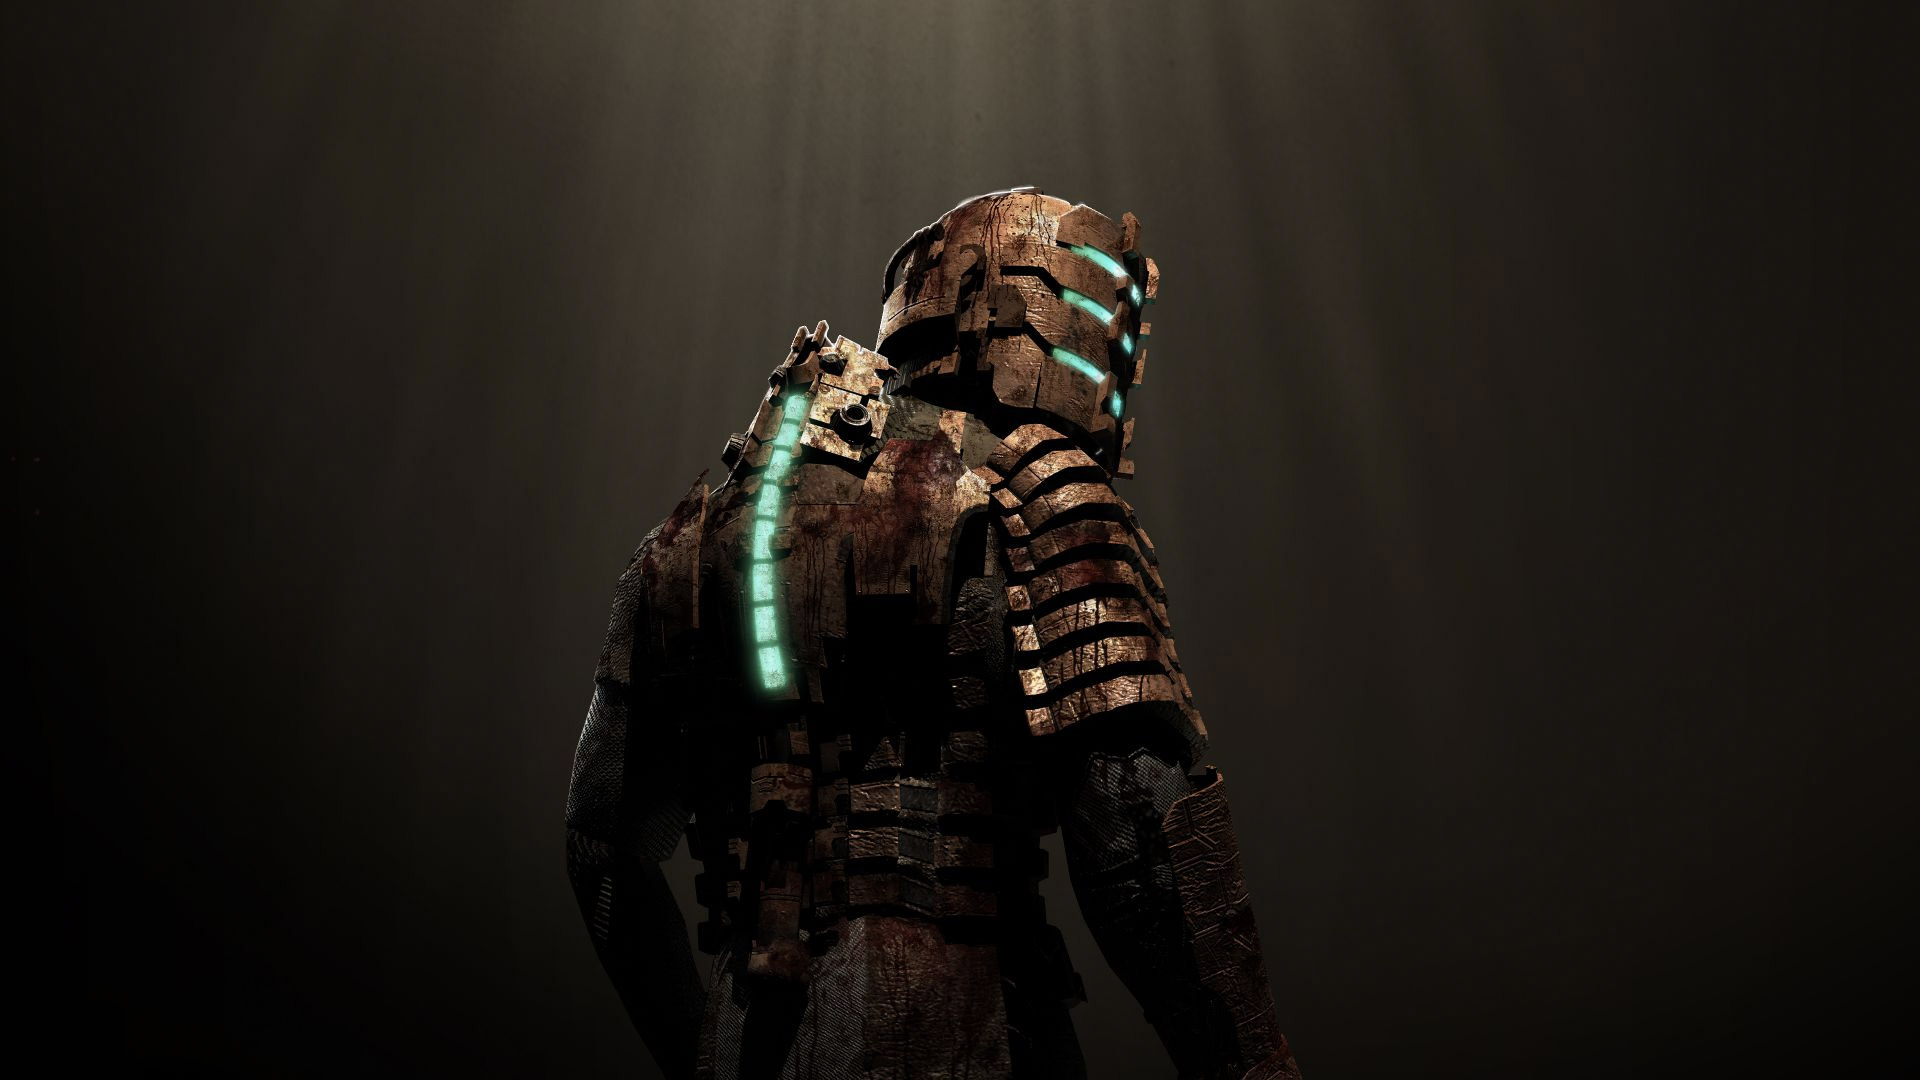 Artwork of Isaac Clarke from Dead Space. His back is toward the viewer and the backdrop is darkness.